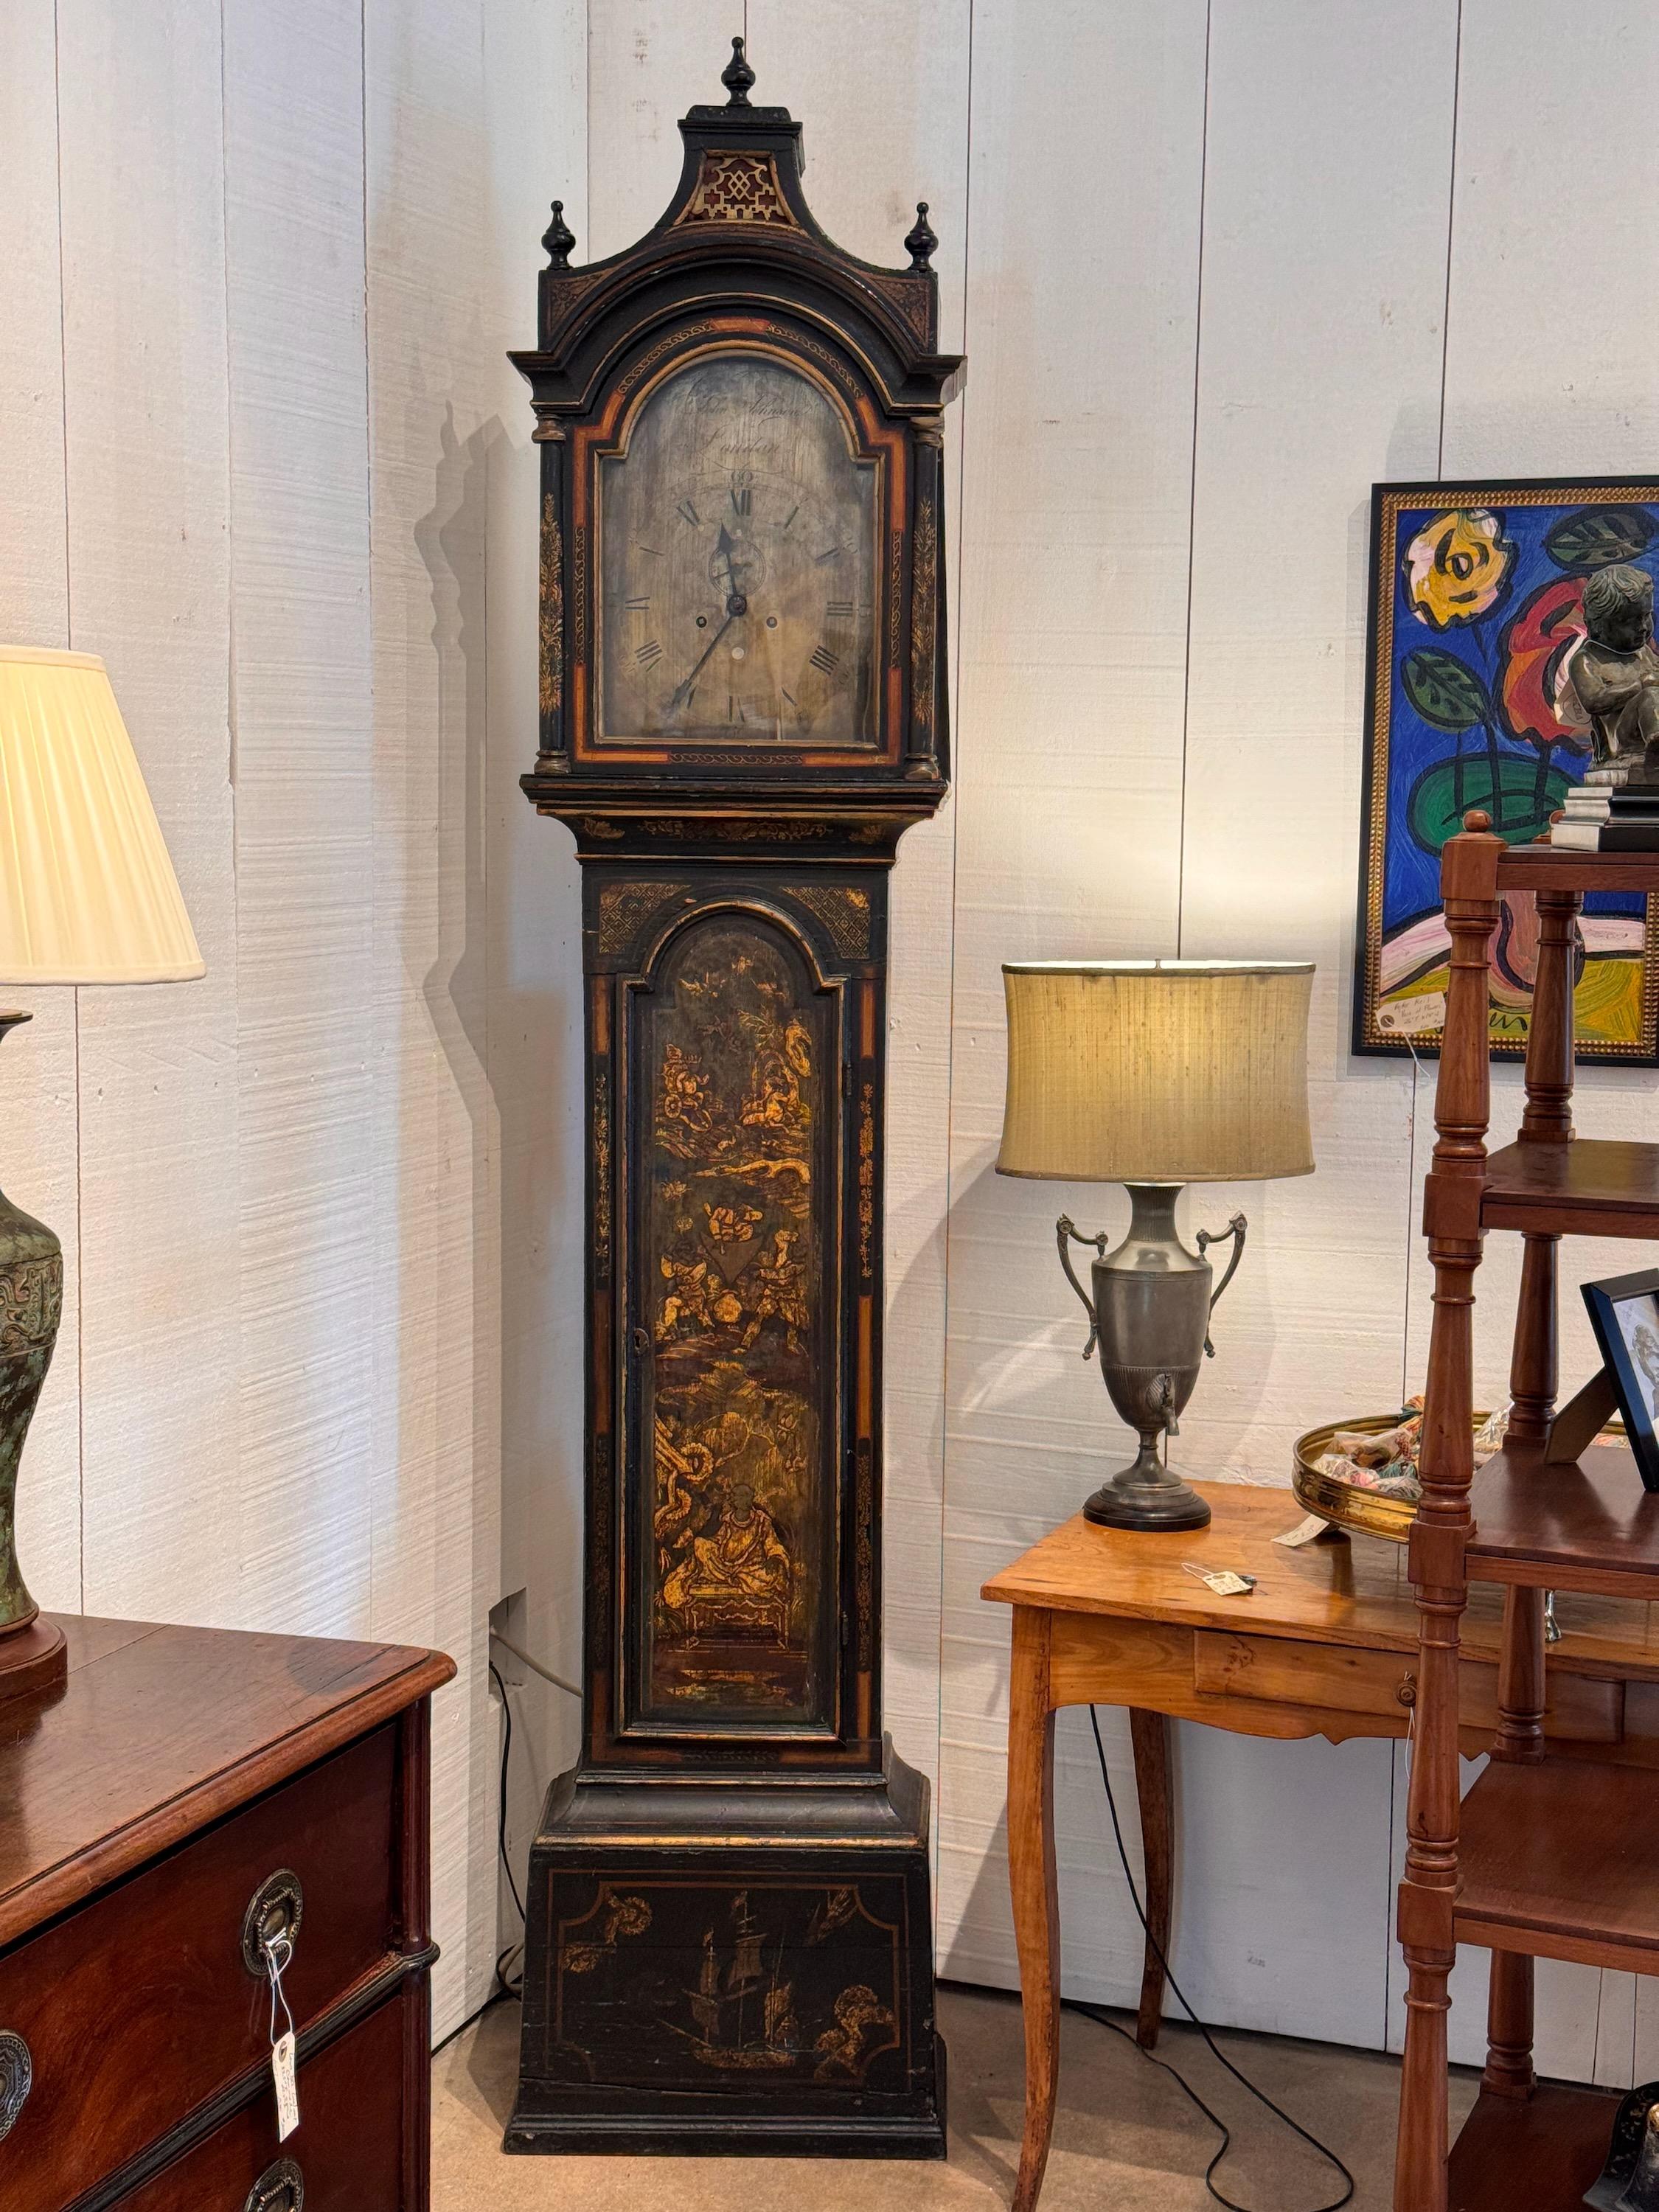 Chinoiserie clocks can make a room. Here is a handsome one.